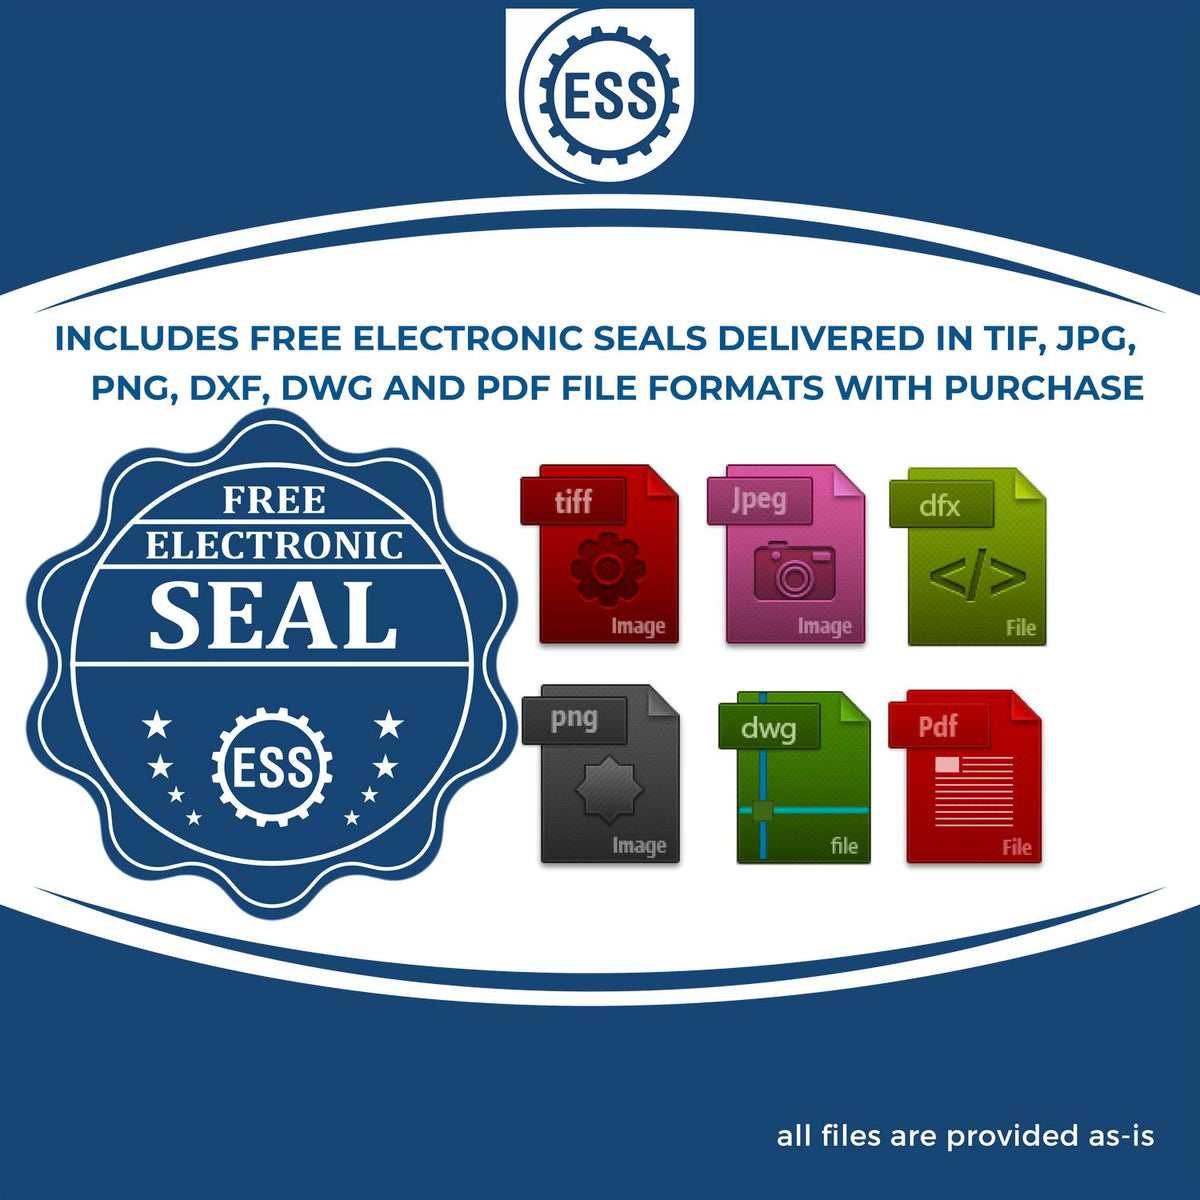 An infographic for the free electronic seal for the Long Reach Delaware PE Seal illustrating the different file type icons such as DXF, DWG, TIF, JPG and PNG.